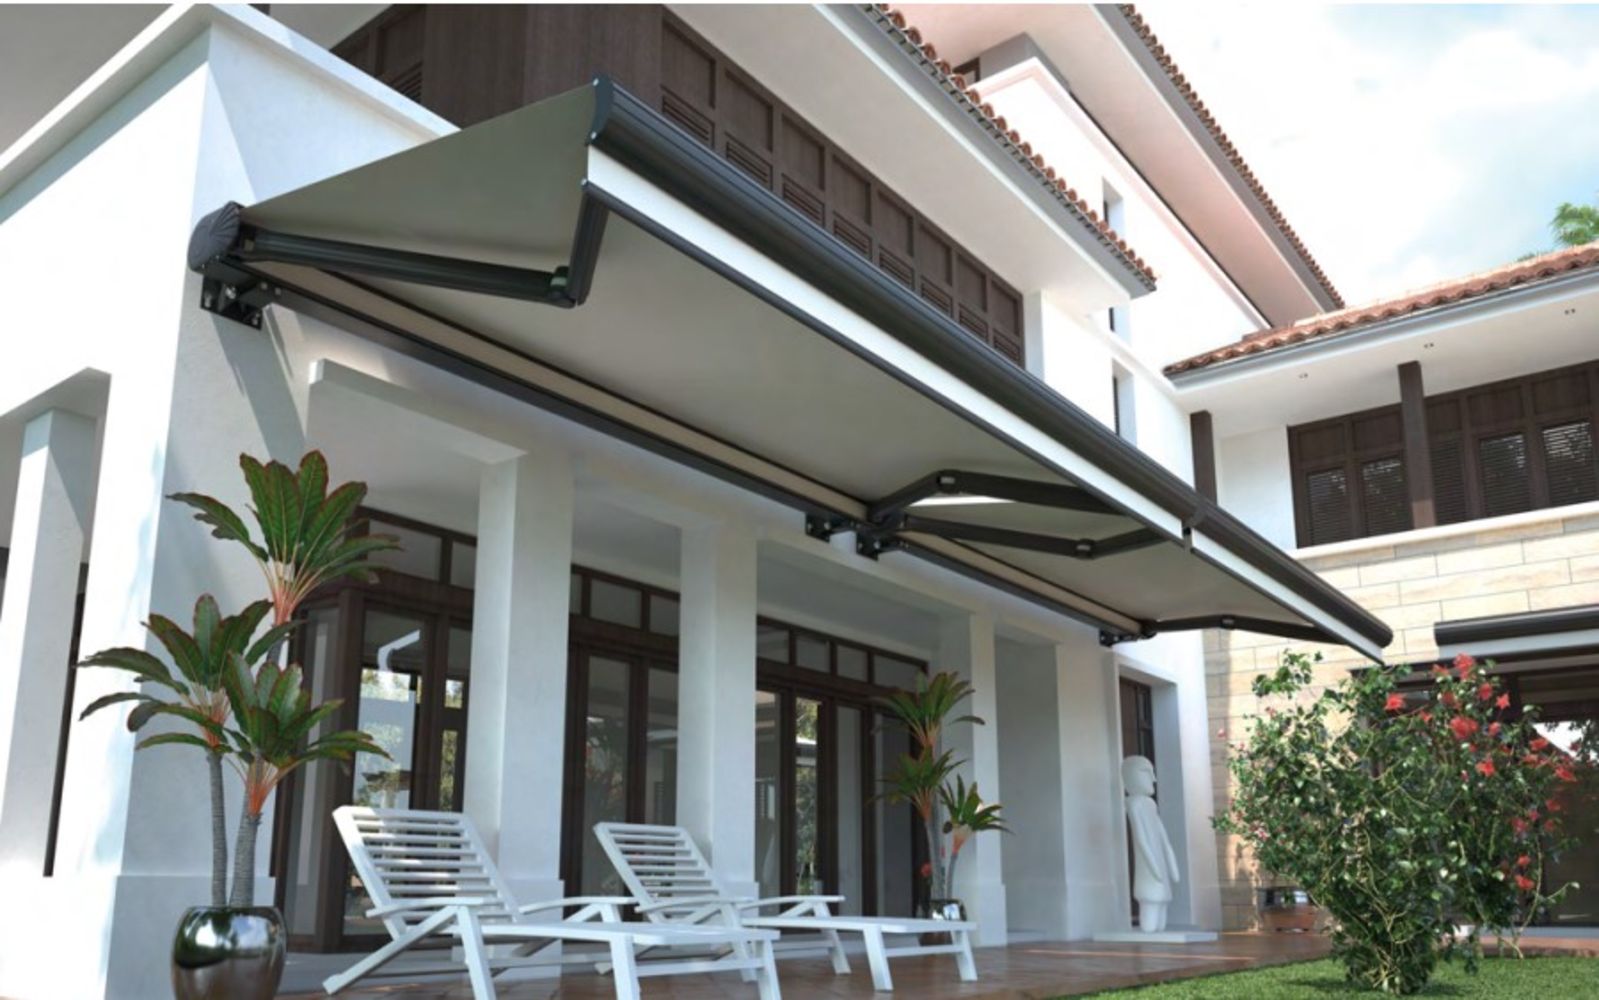 Reduced start prices on Brand new High end electric retractable commercial quality Awnings, at up to 70% off RRP, as sold in Costco